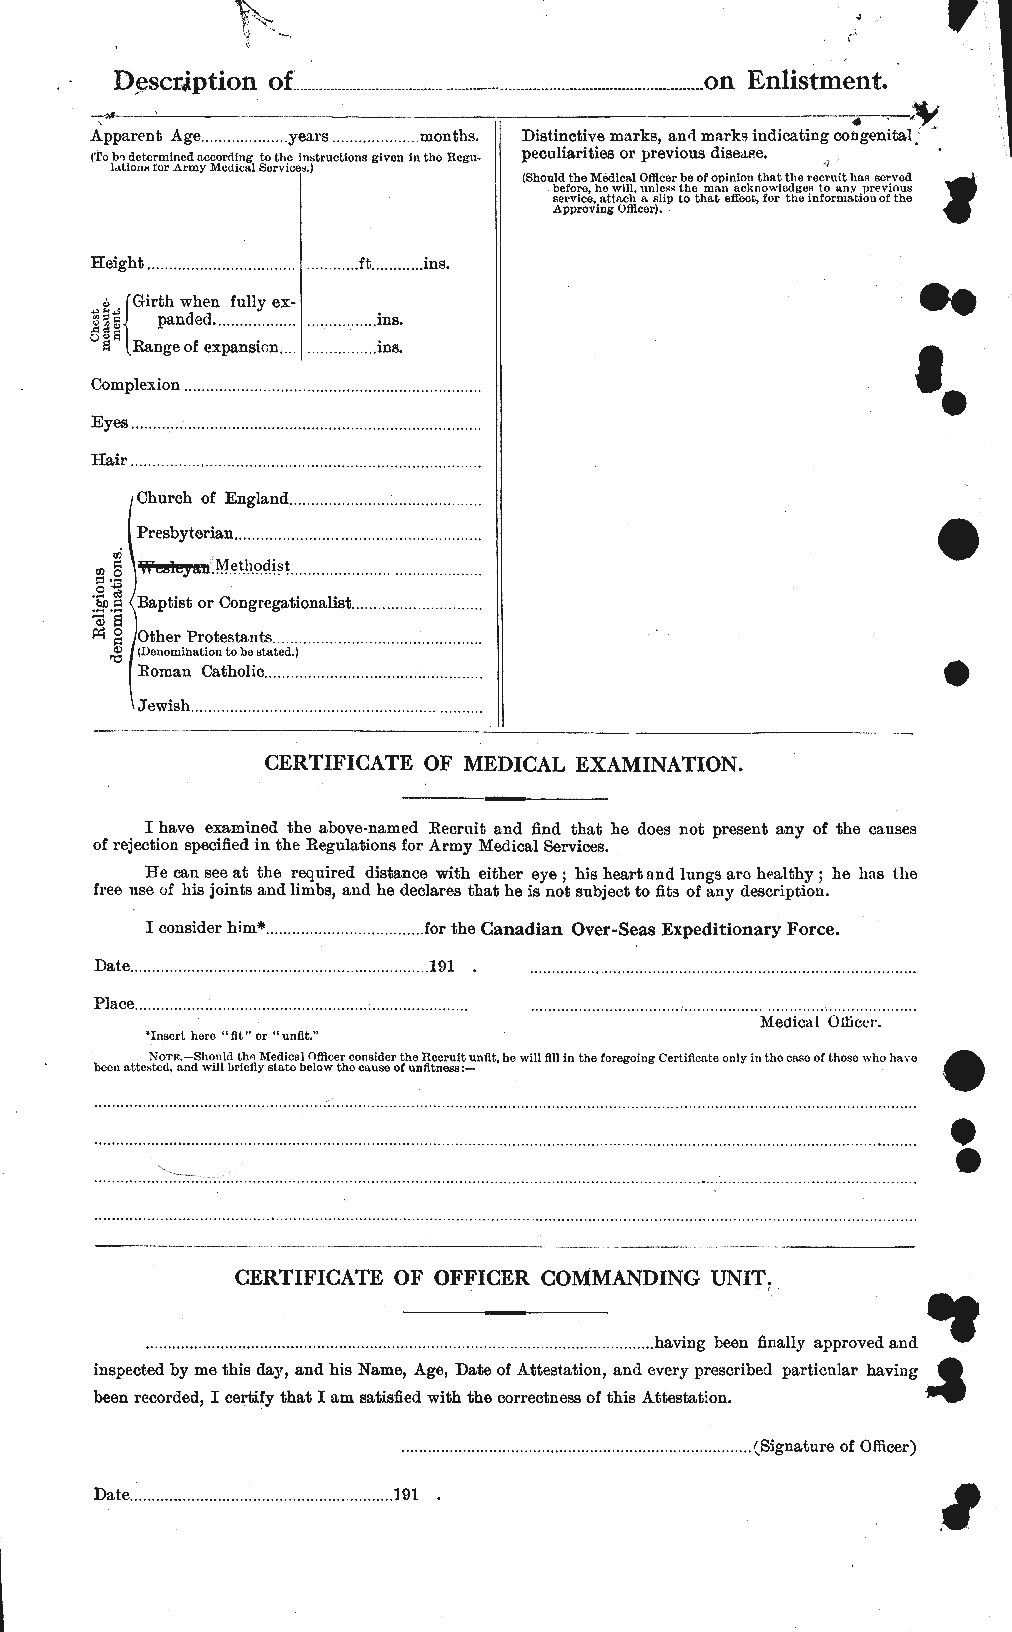 Personnel Records of the First World War - CEF 274656b